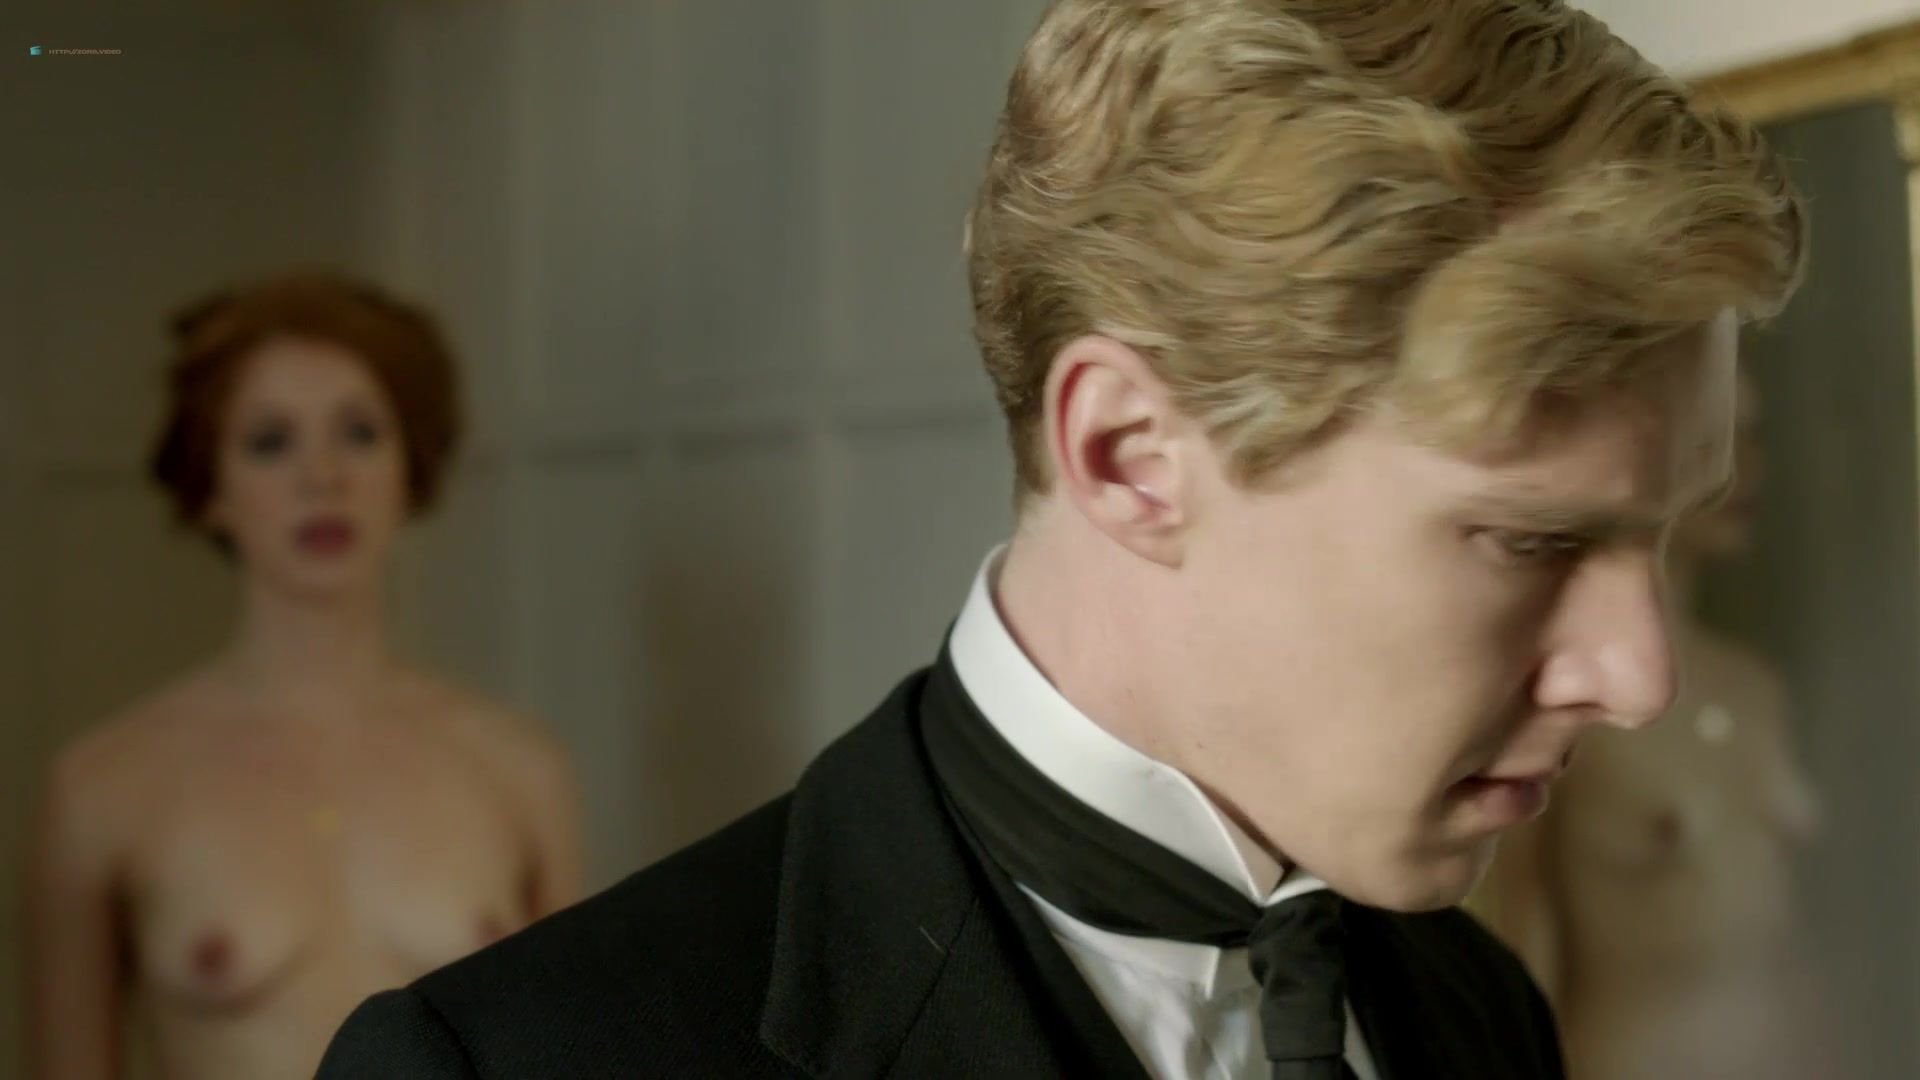 OnOff Rebecca Hall, Adelaide Clemens naked - Parades End (2012) Closeup